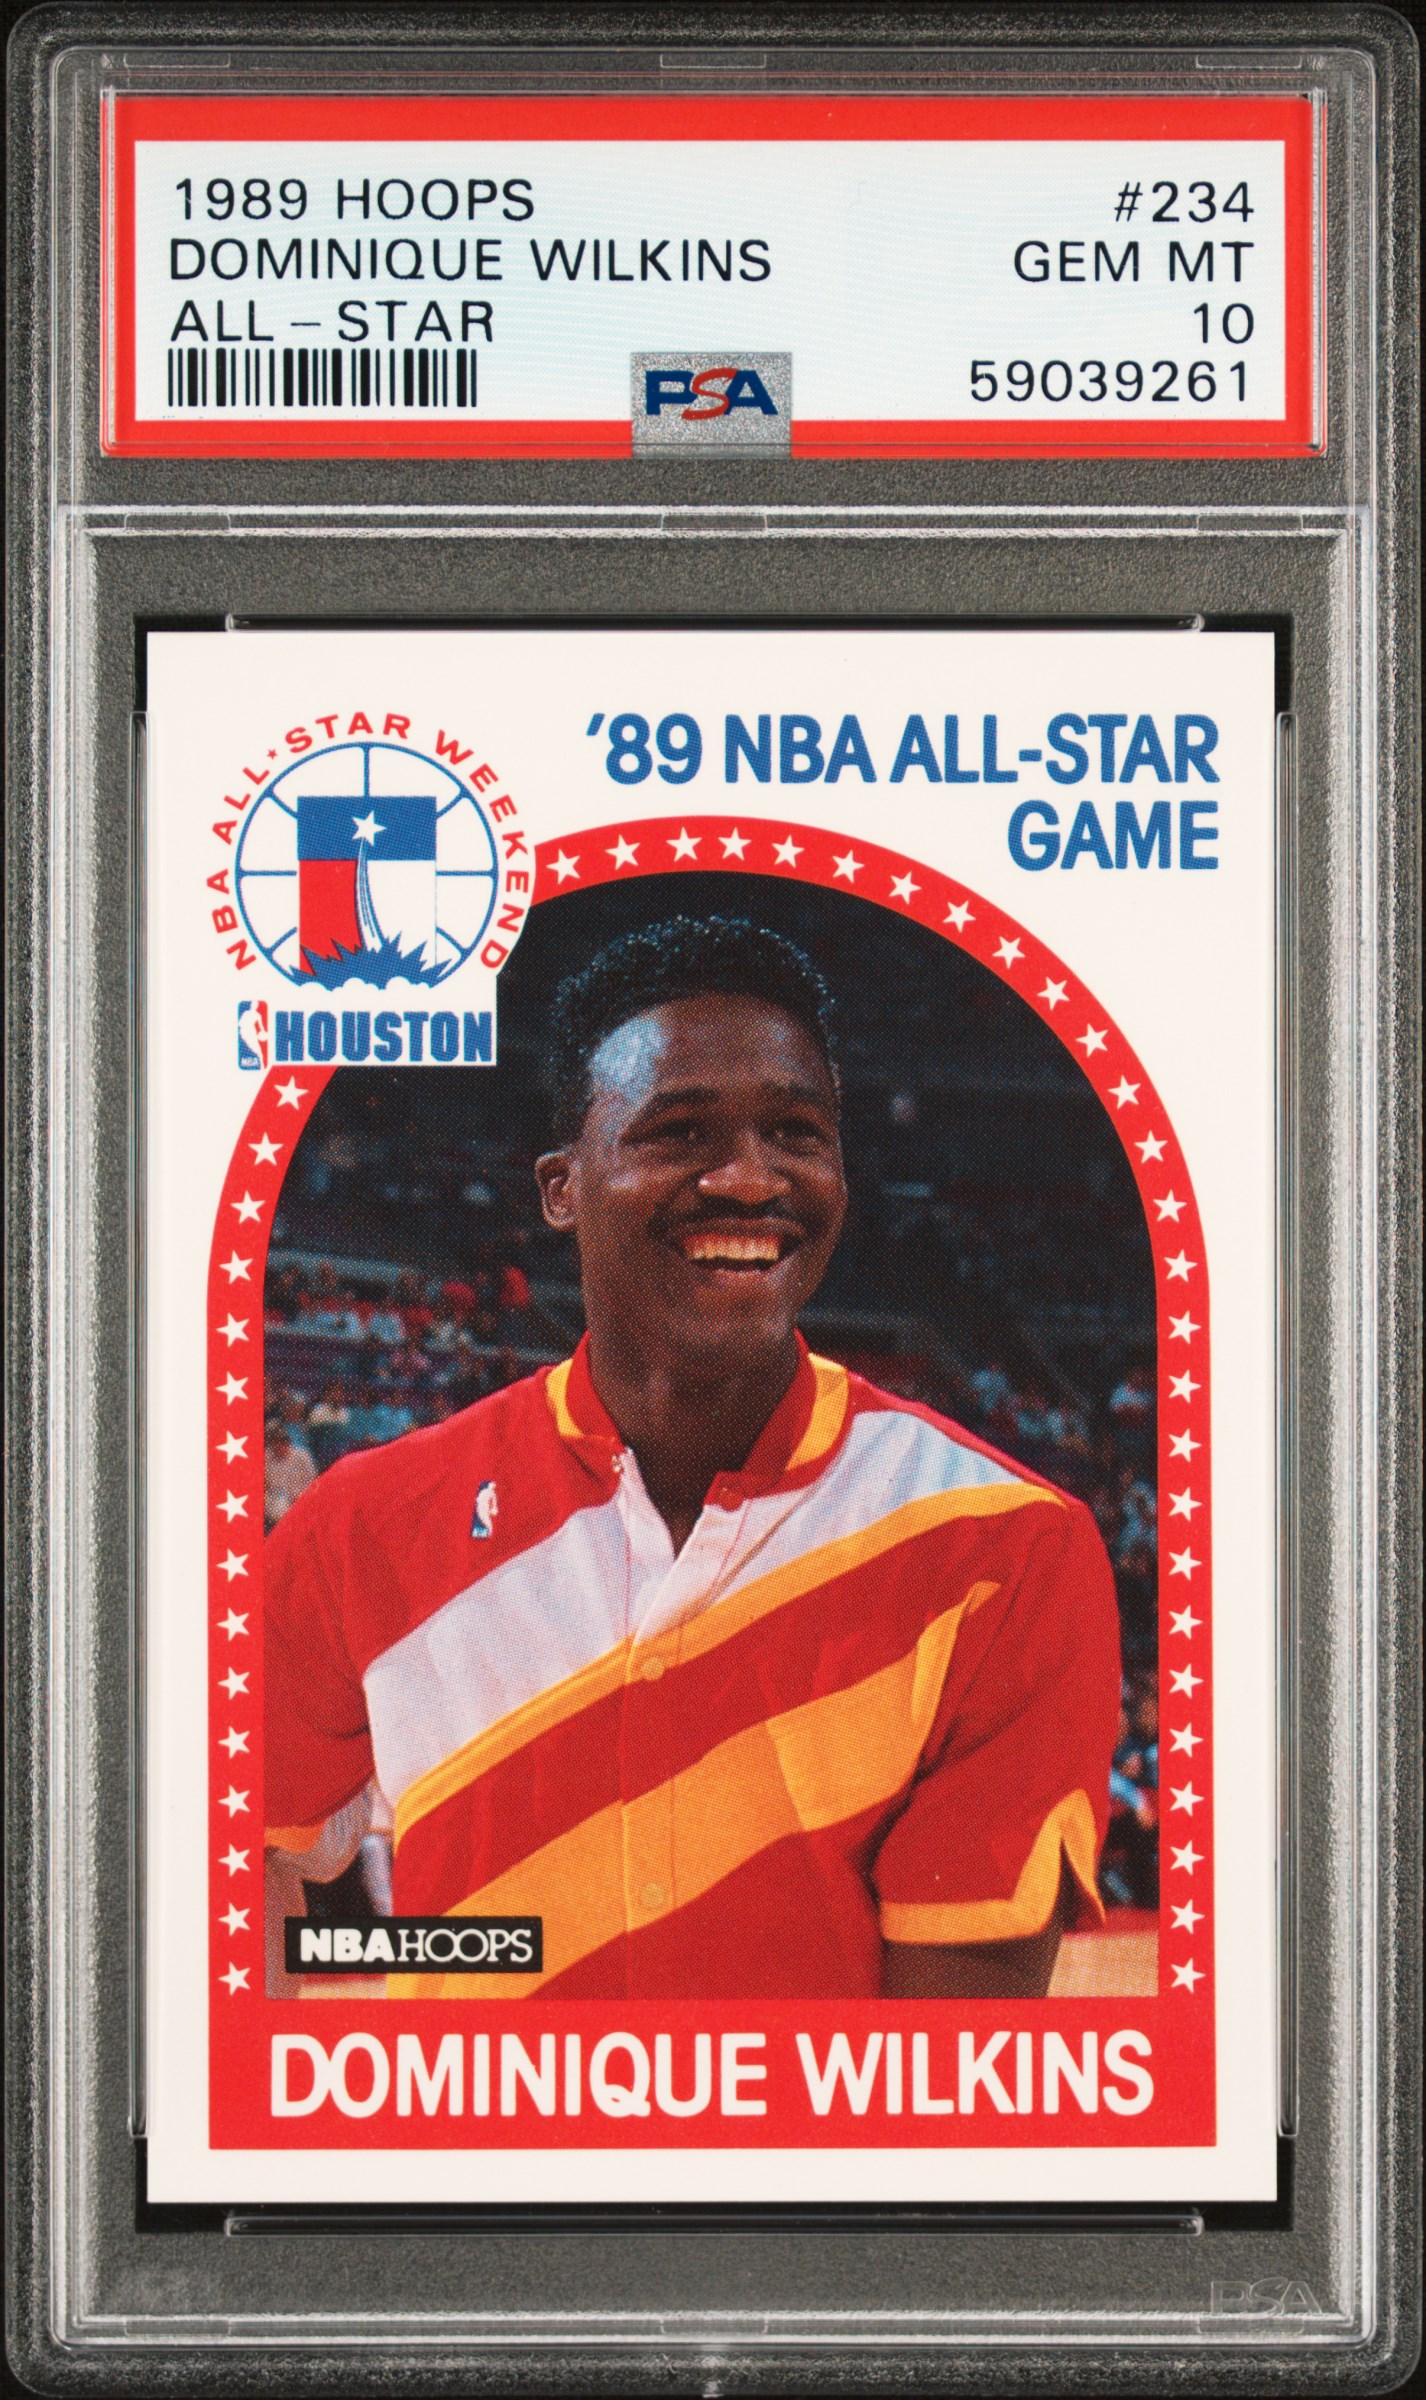 1989 Hoops 234 Dominique Wilkins All-Star PSA 10